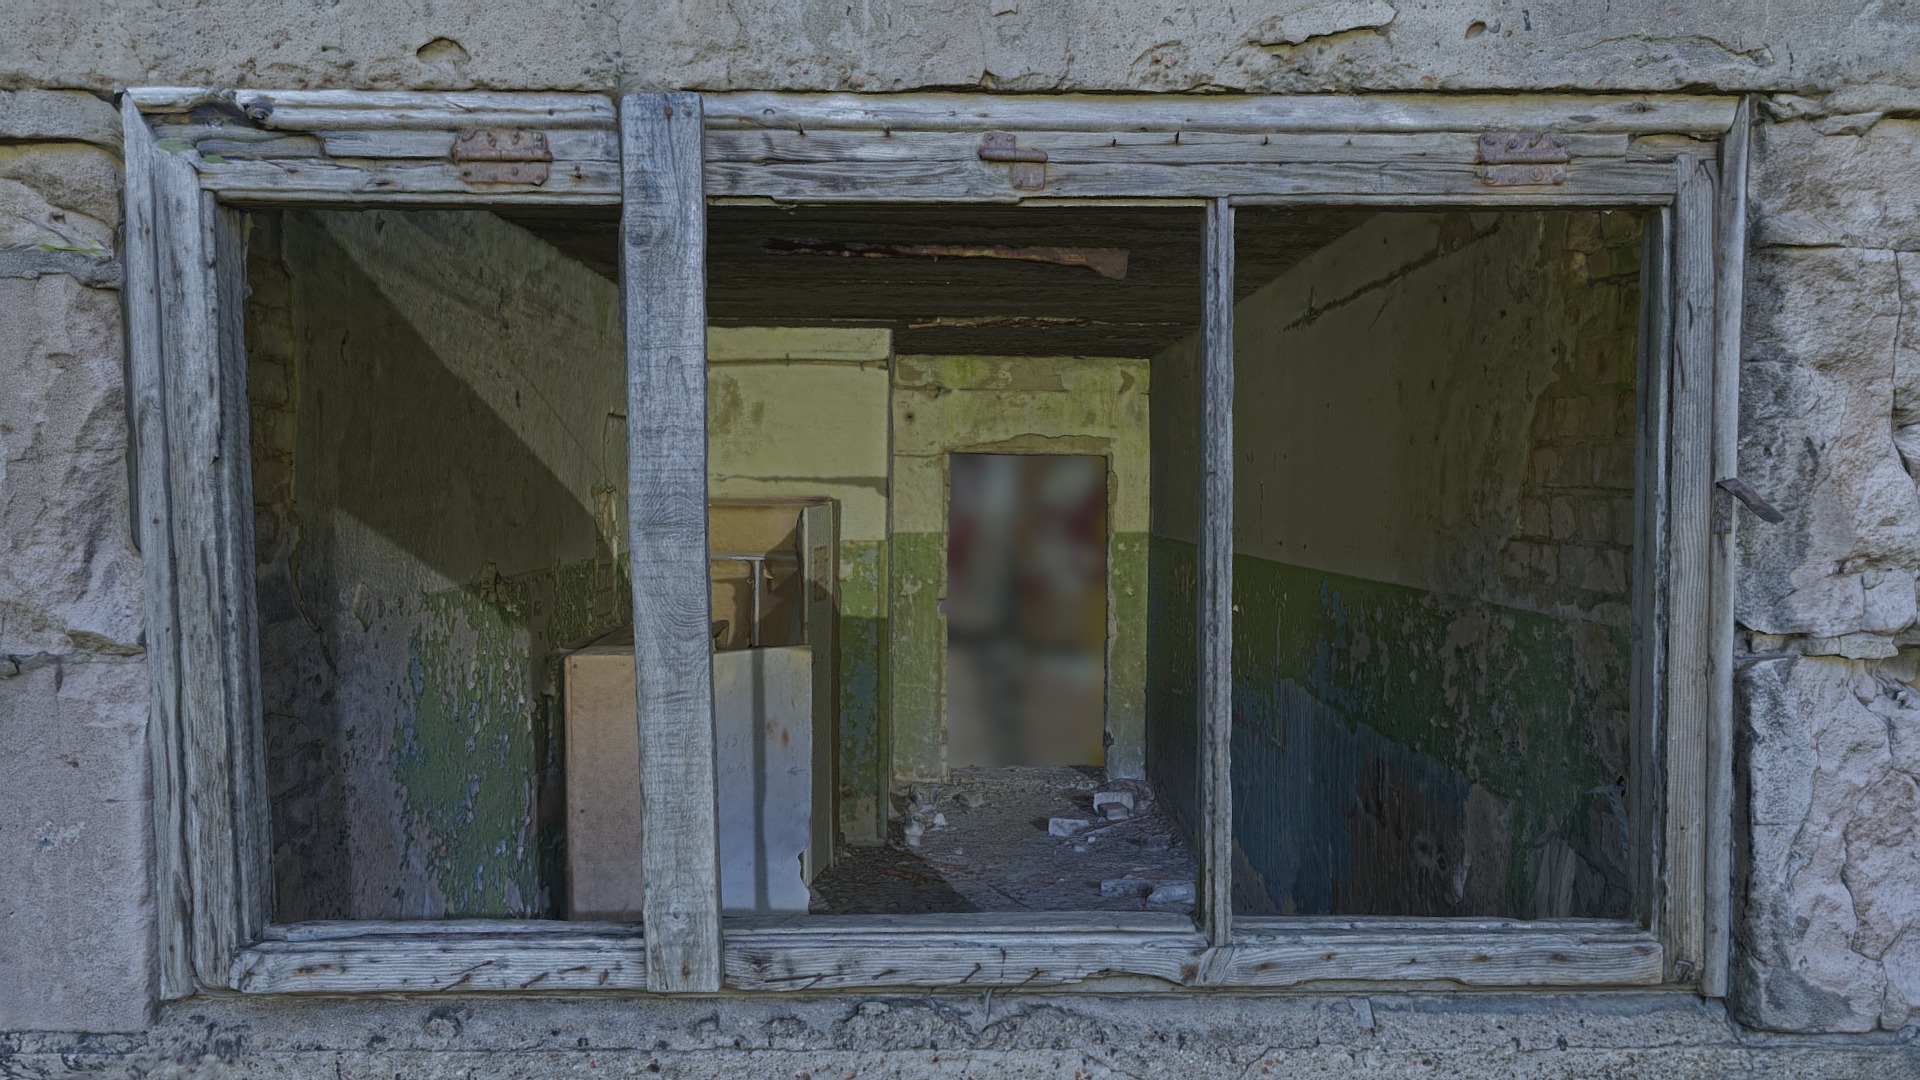 3D model VR Abandoned Room - This is a 3D model of the VR Abandoned Room. The 3D model is about a broken window in a building.